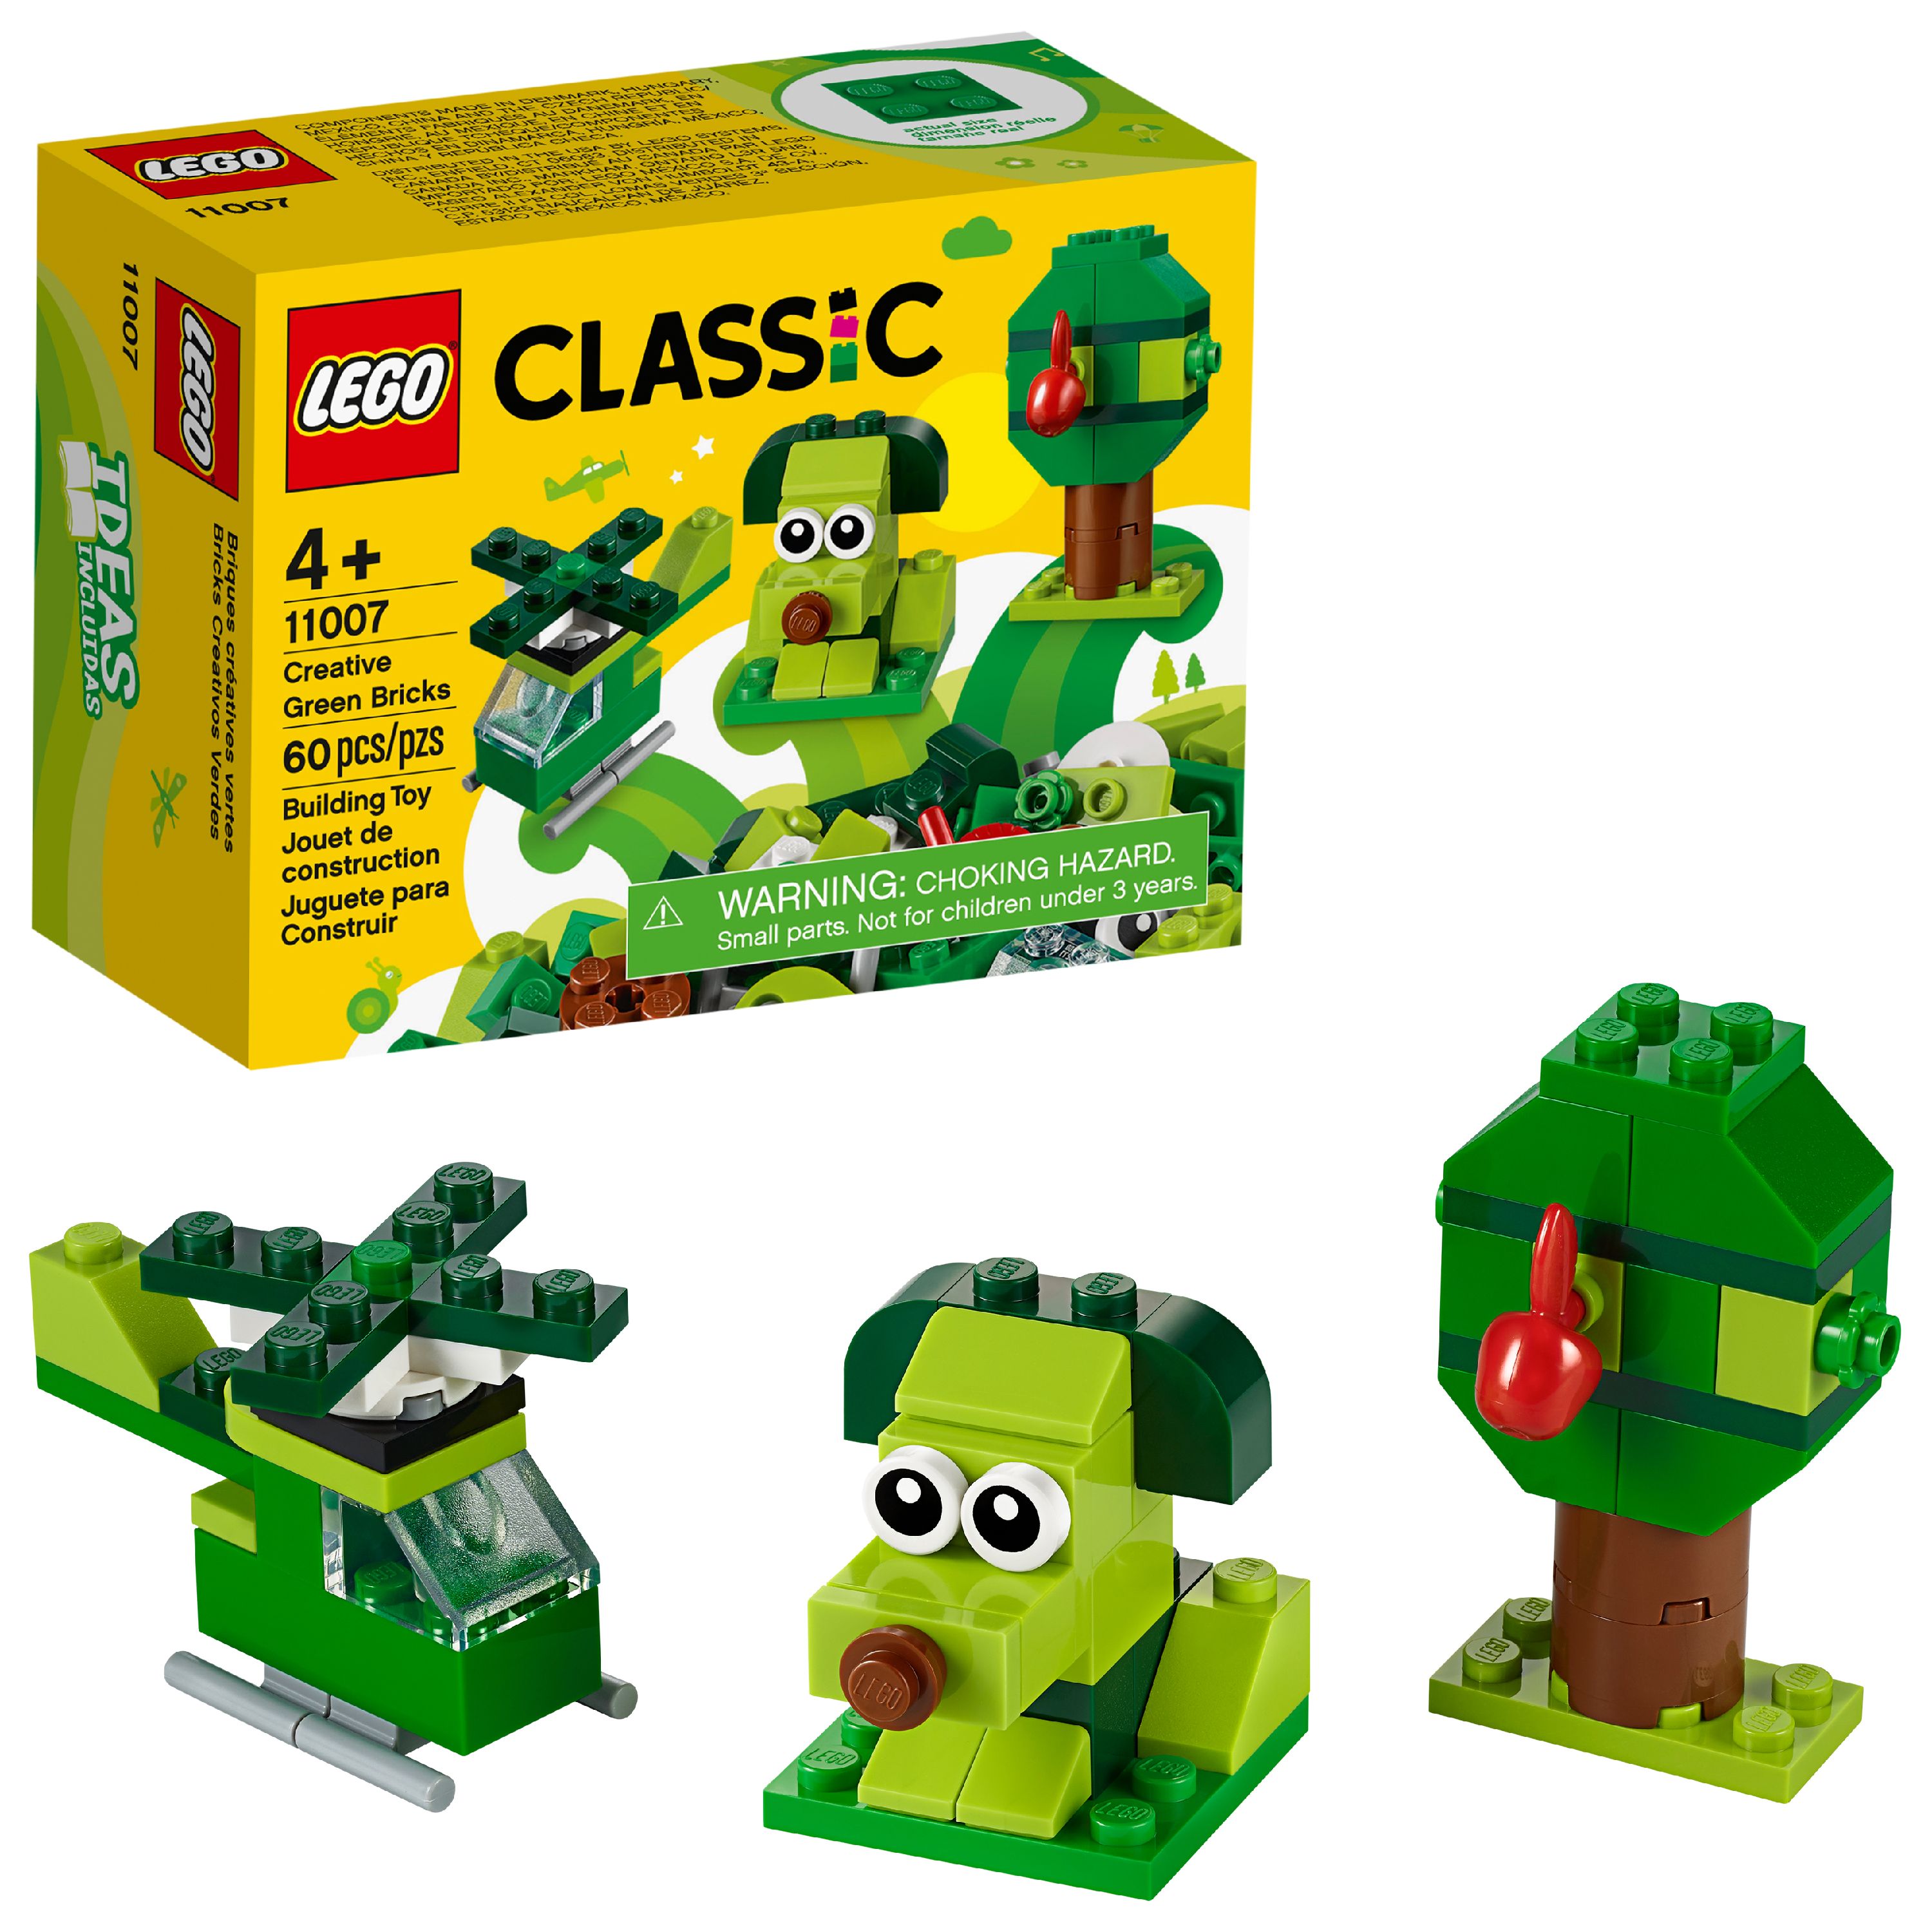 LEGO Classic Creative Green Bricks 11007 Building Kit to Inspire Imaginative Play (60 Pieces) - image 1 of 7